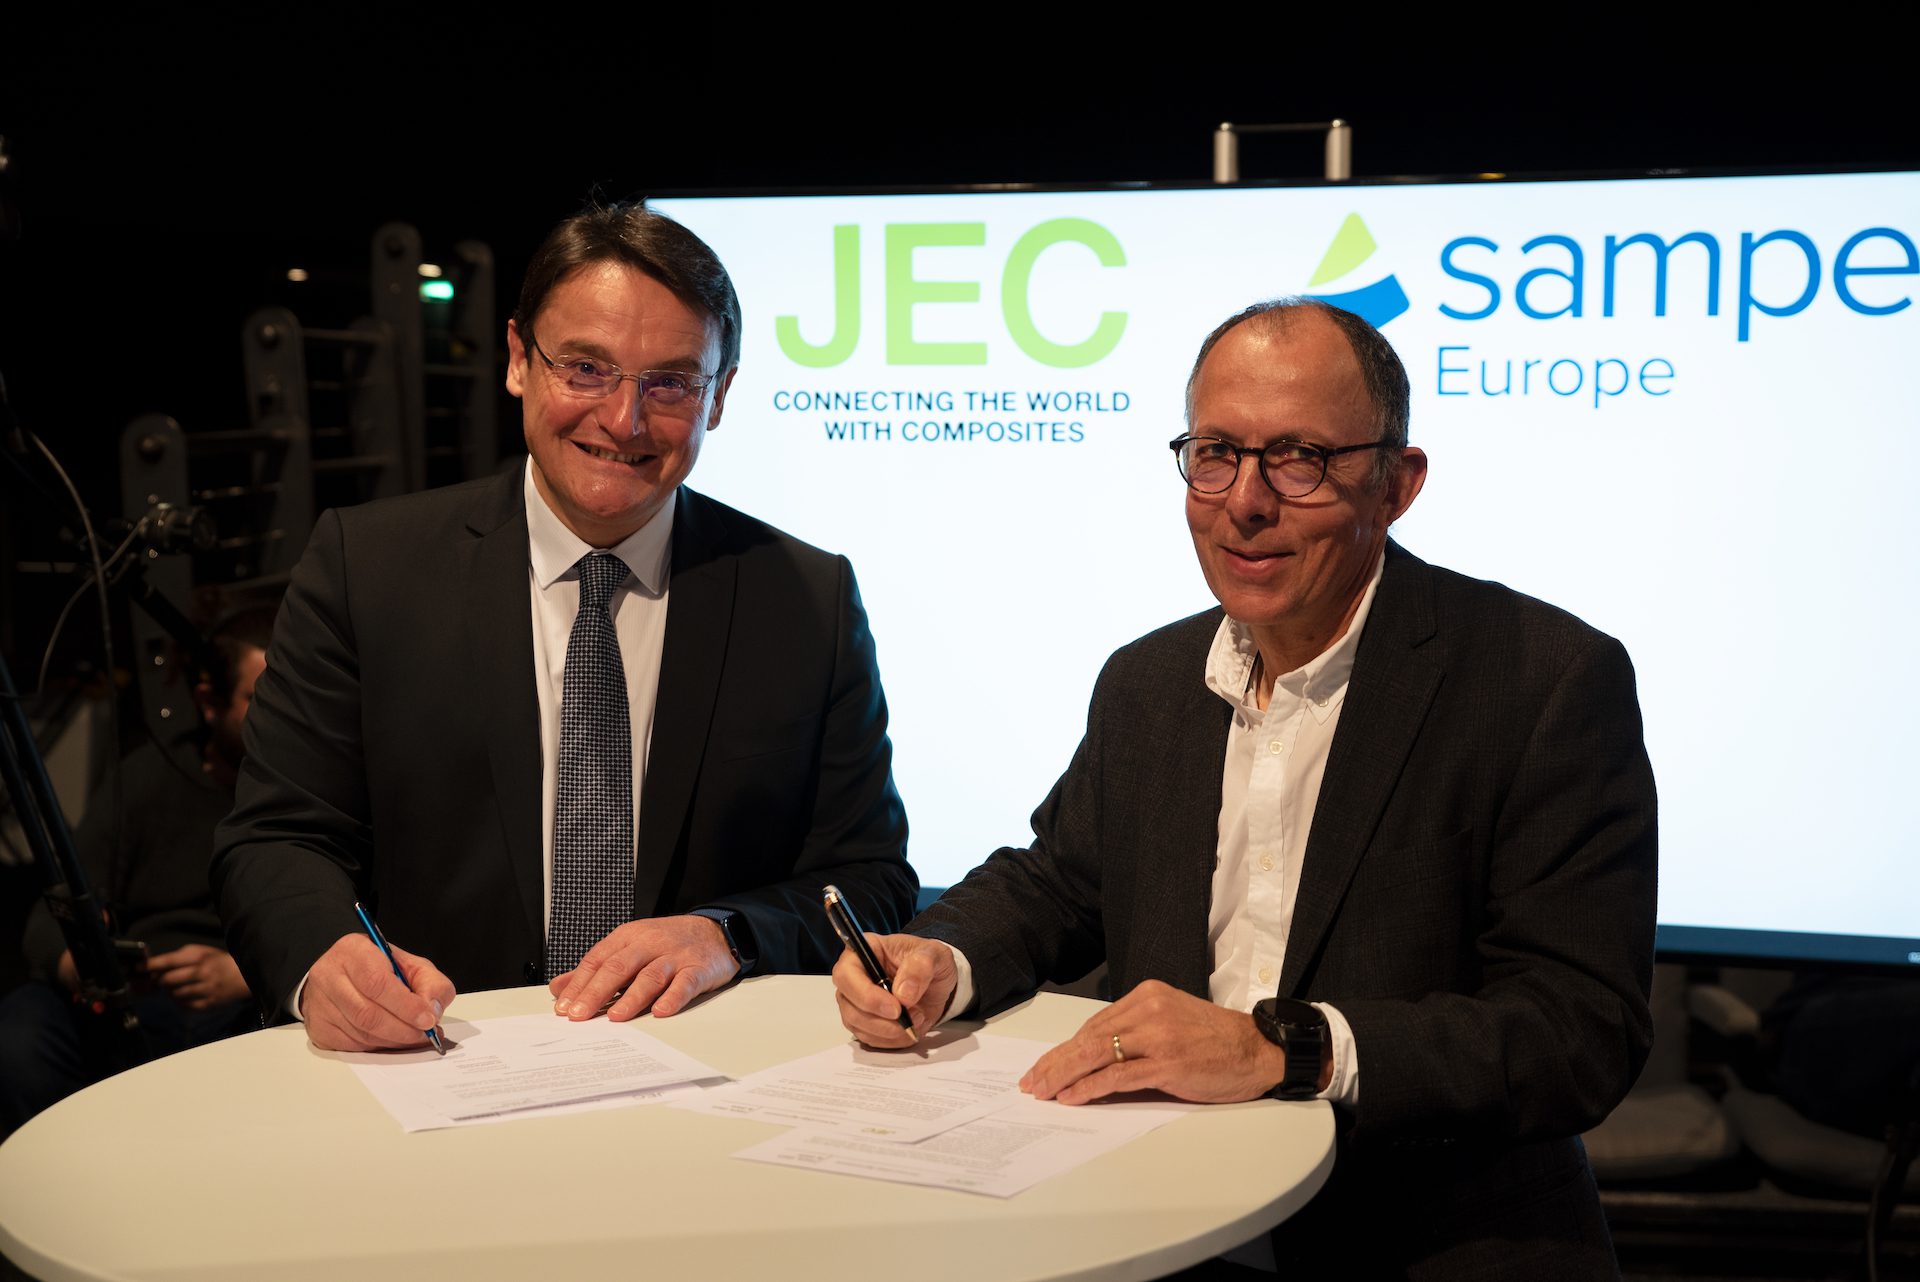 SAMPE Europe and JEC expand their cooperation partnership about events and mutual community activation